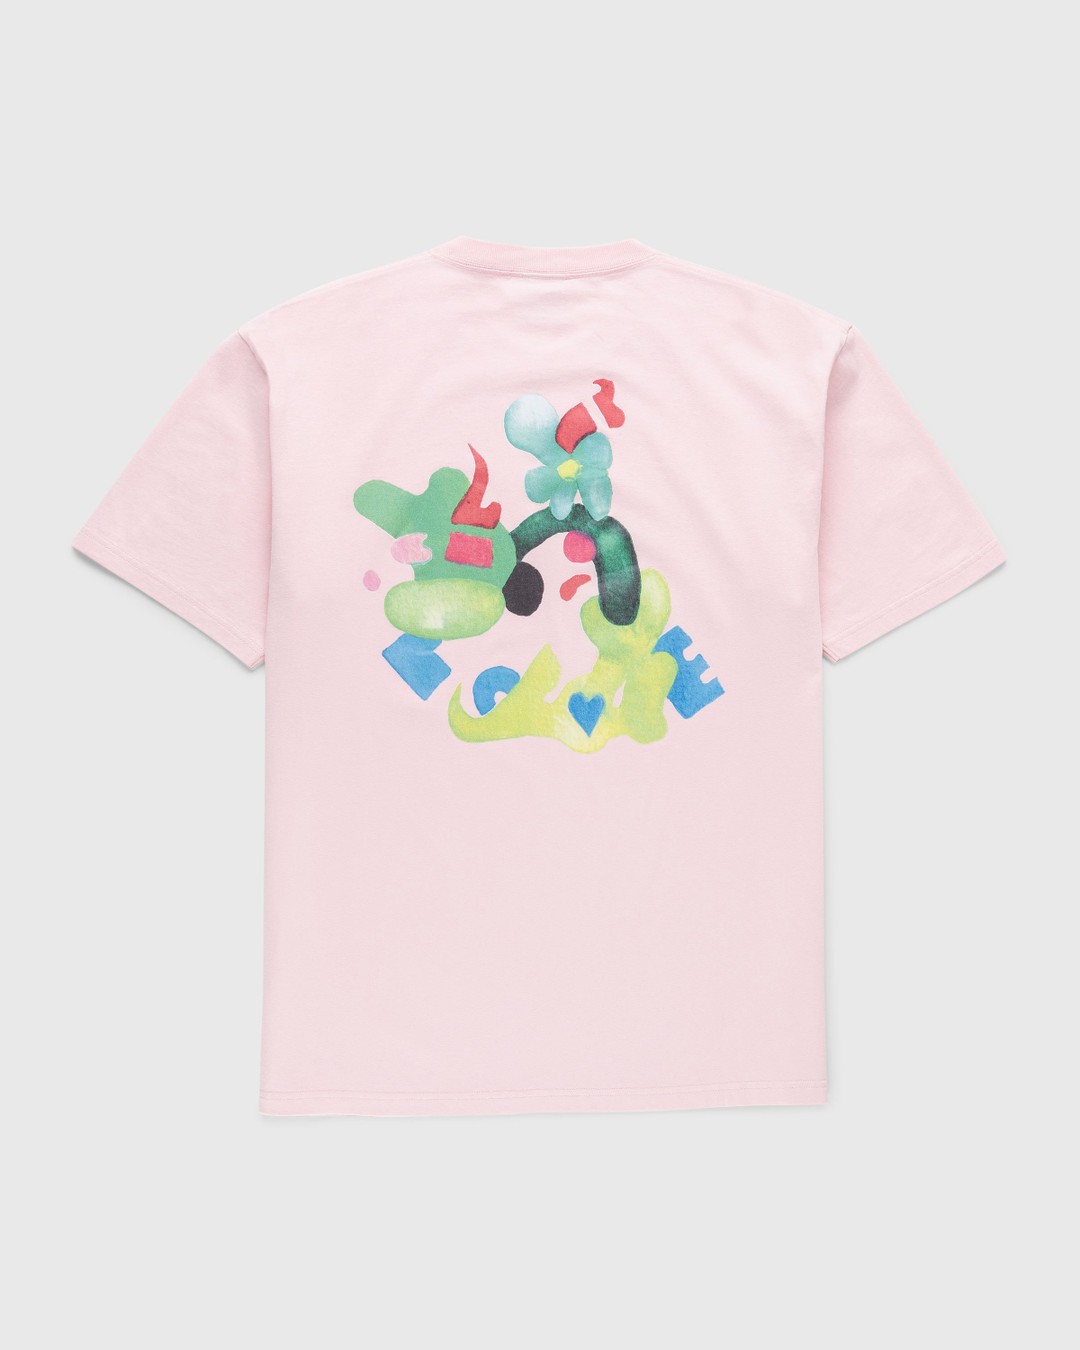 NTS x Highsnobiety – Graphic T-Shirt Pink  - Tops - Pink - Image 1